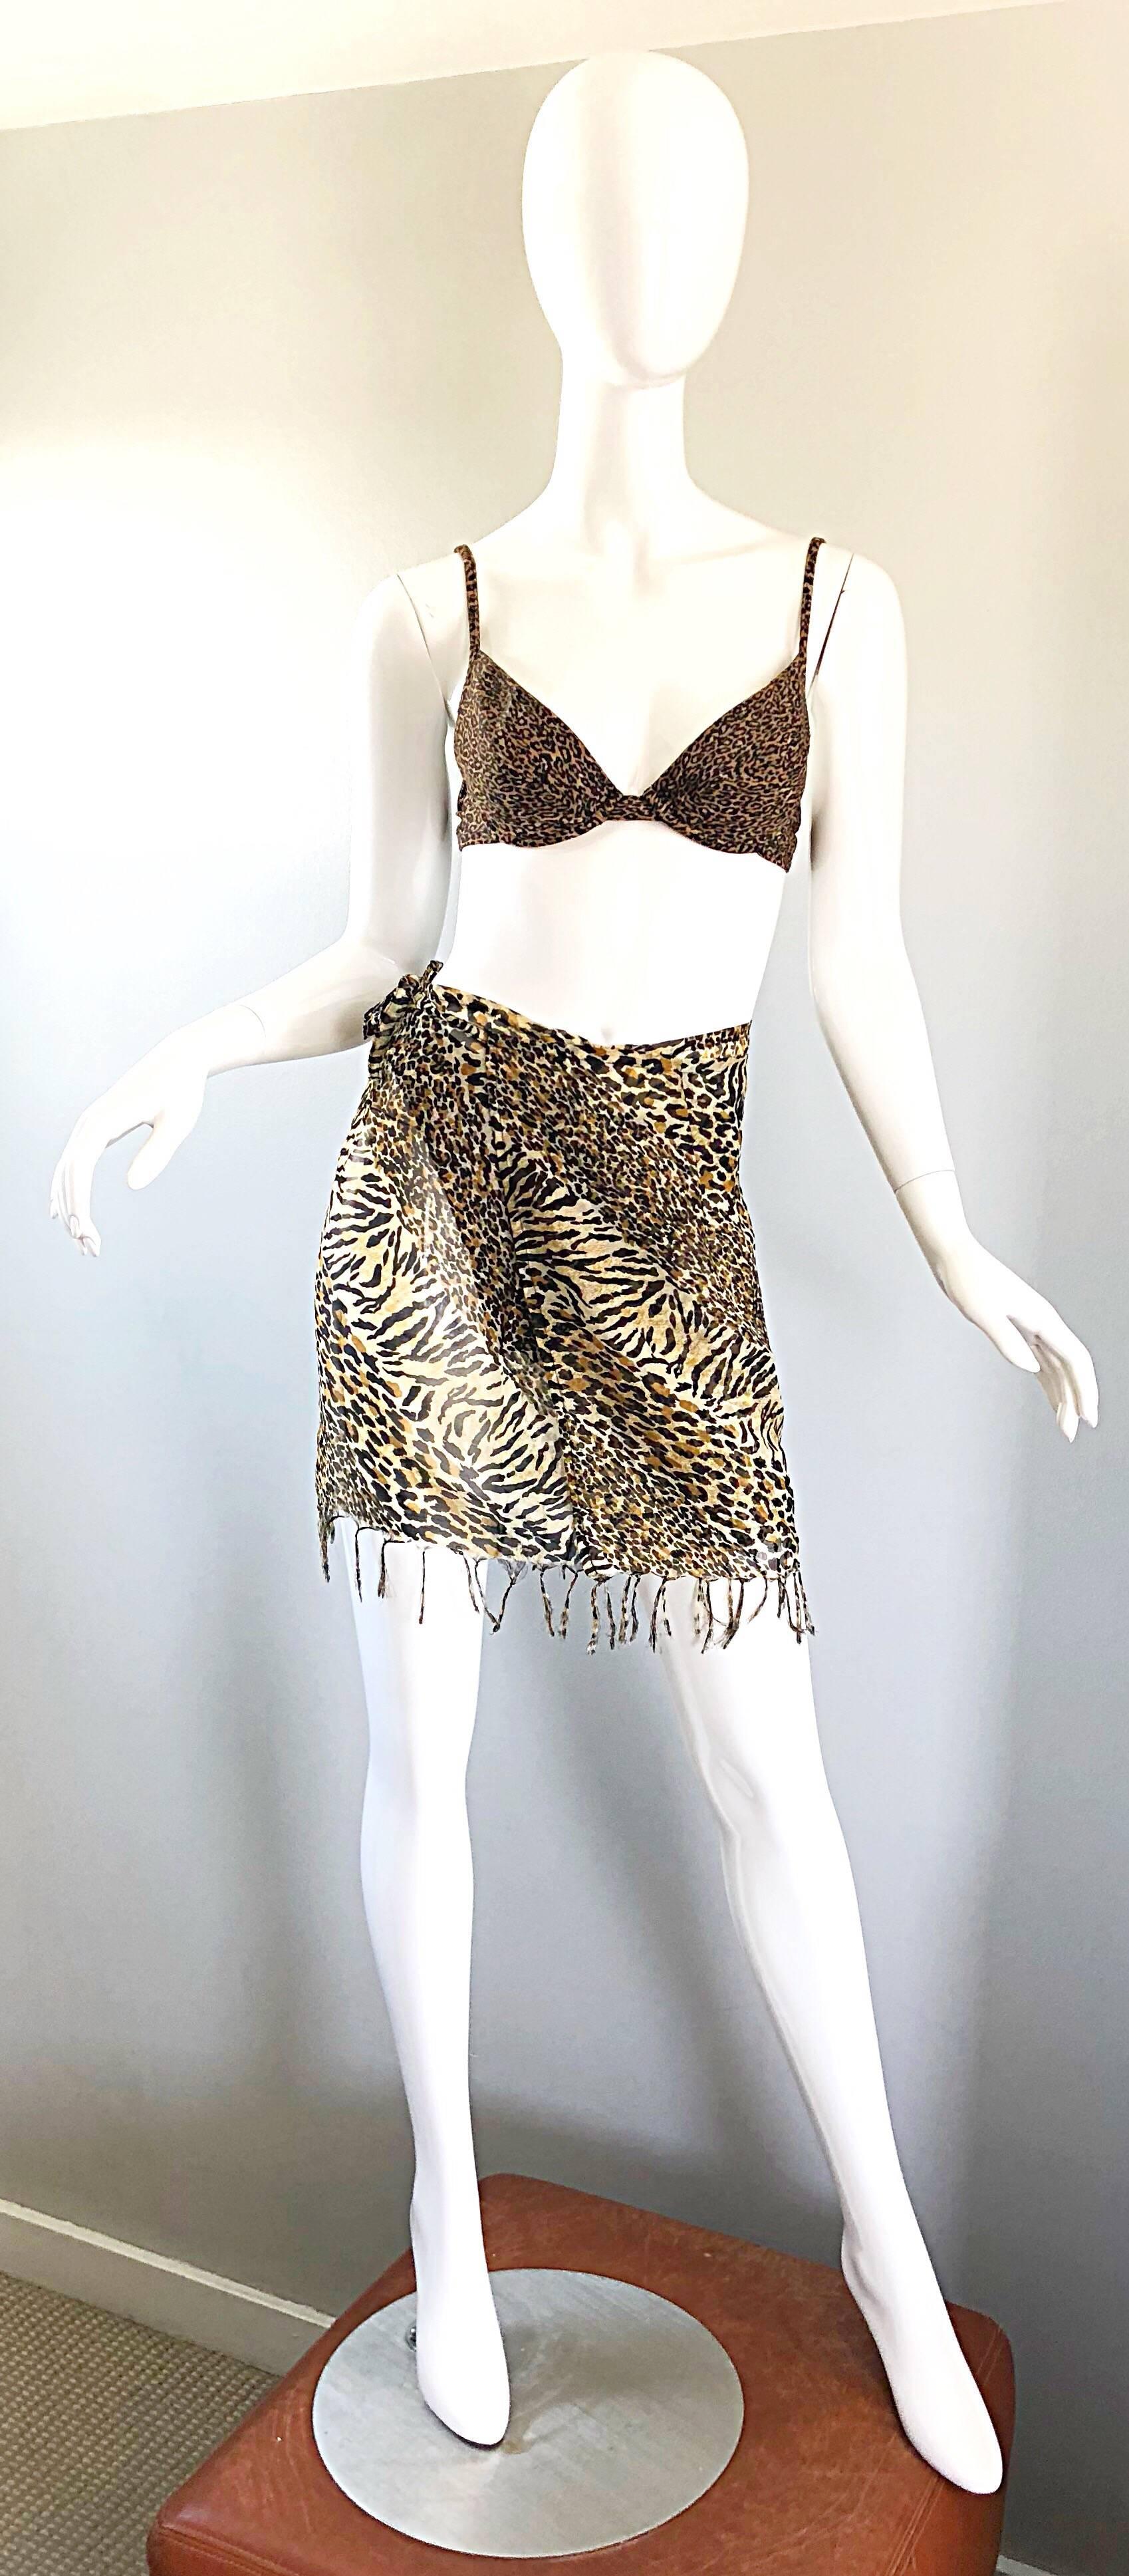 Sexy 1980s OSCAR DE LA RENTA leopard / cheetah animal print three piece bikini ensemble! Features a chic current trend high waist. Top can be worn traditional or in a racerback style, and features adjustable straps and clasp closure at center back.